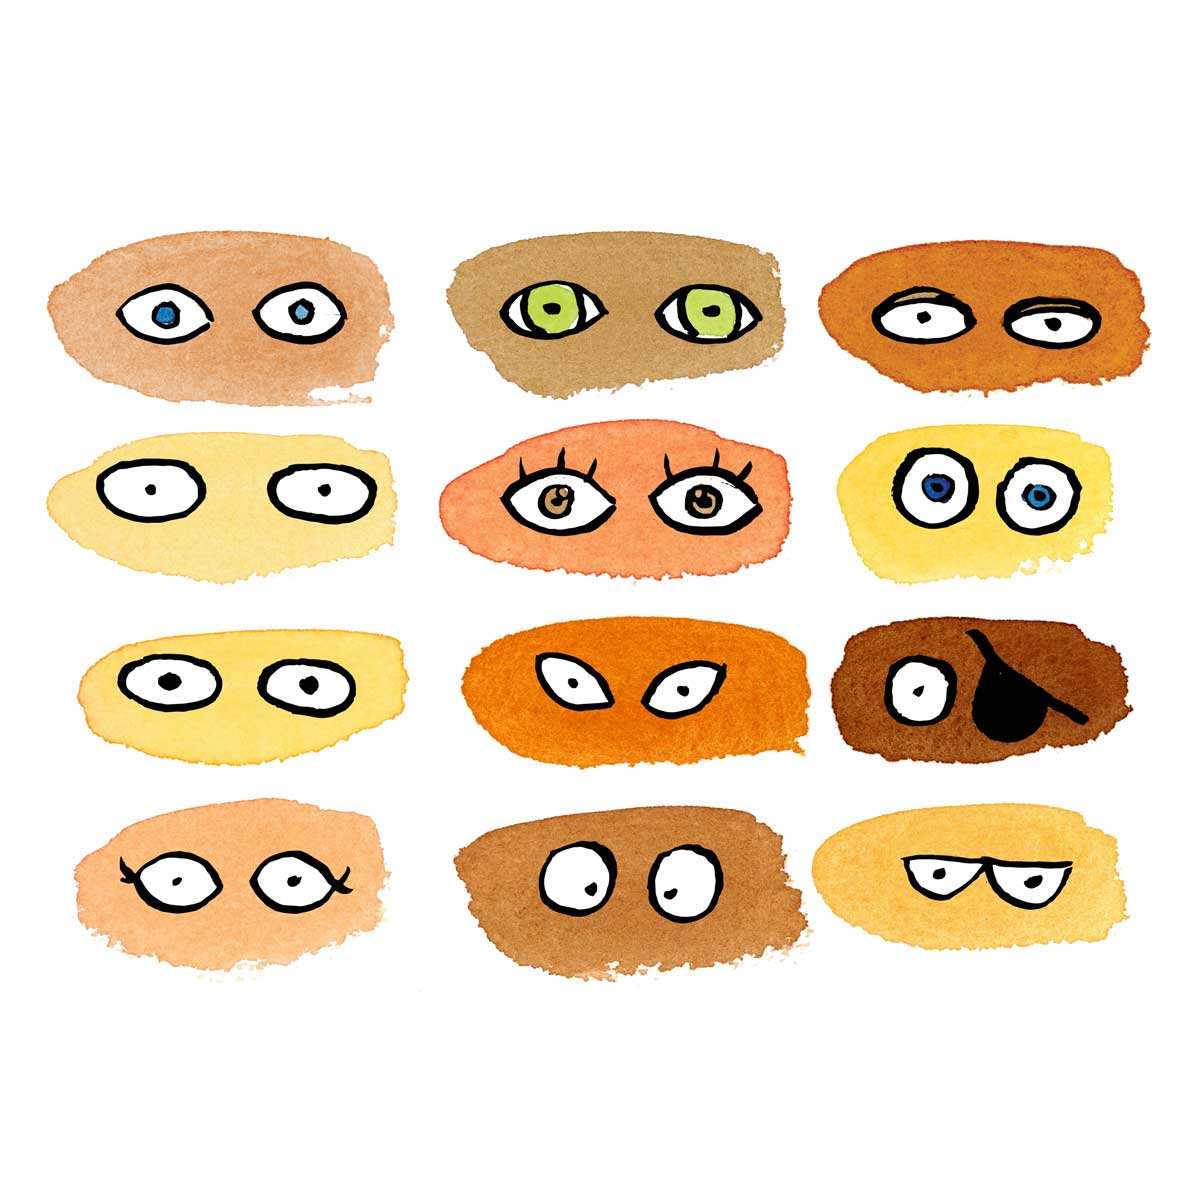 illustration of a set of eyes that are diverse